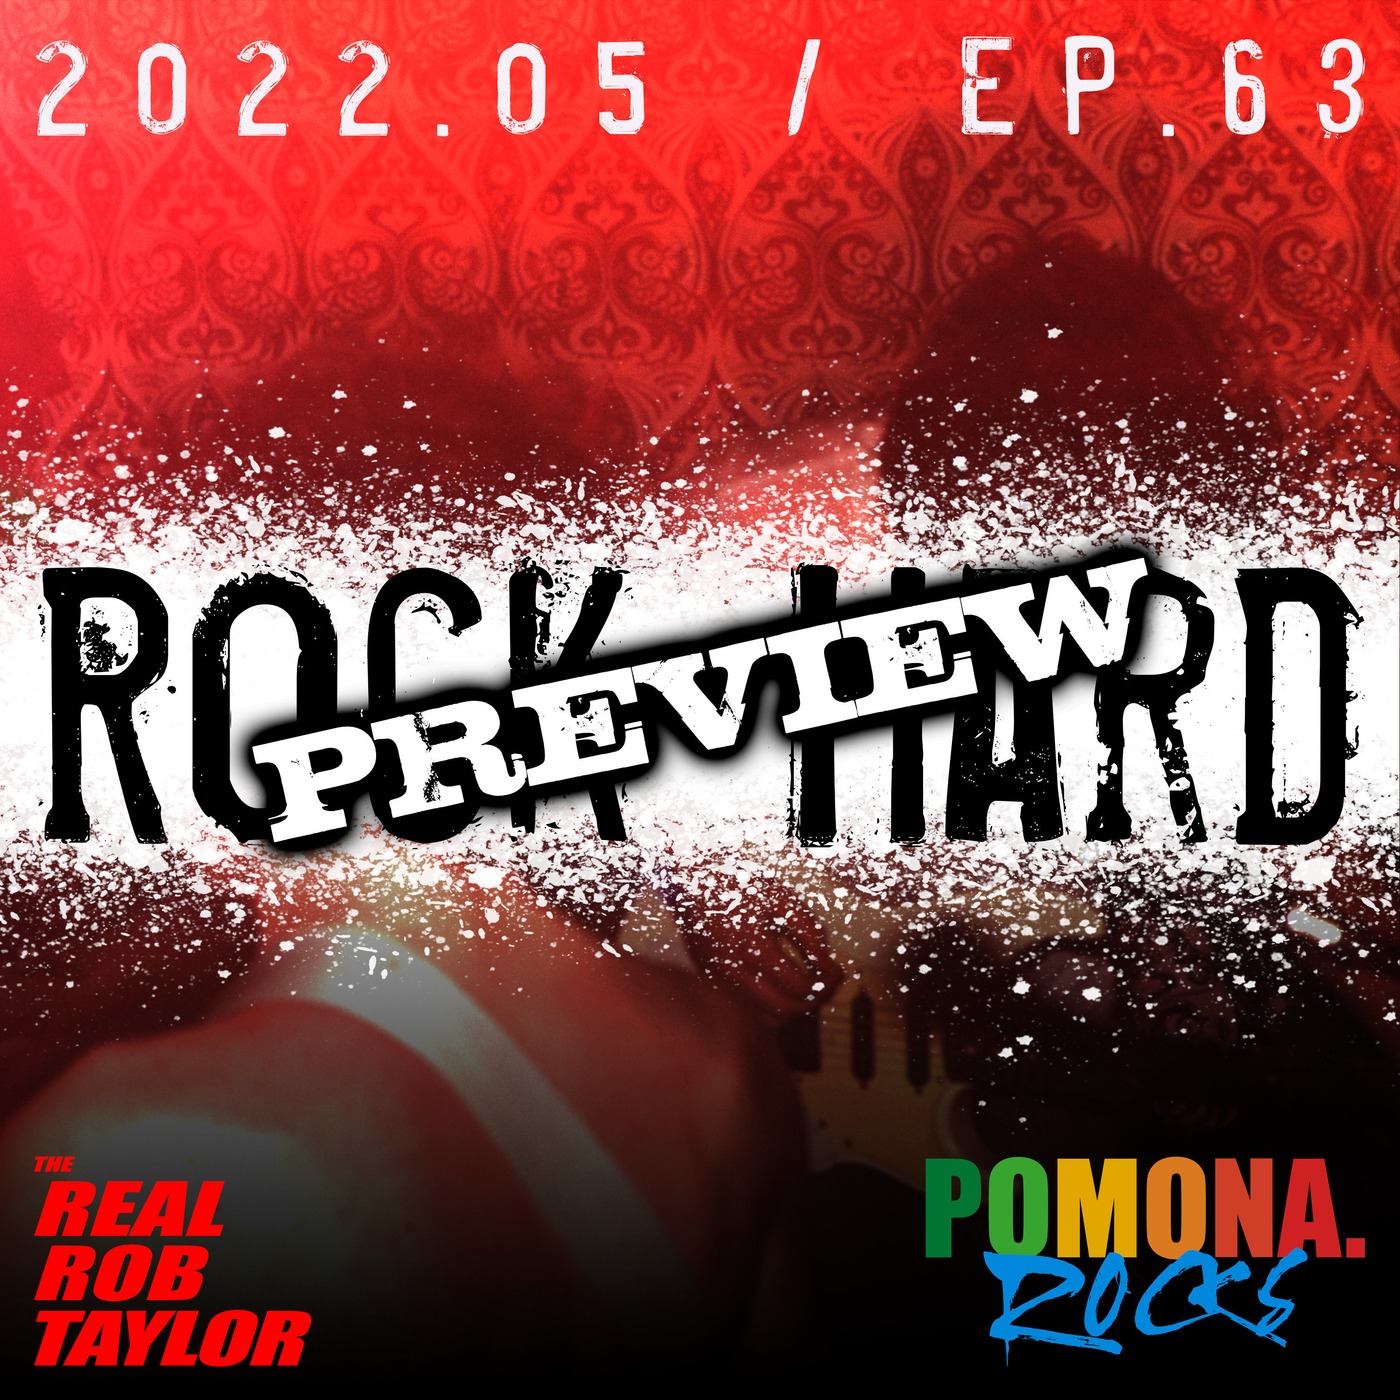 ROCK HARD with The REAL ROB TAYLOR 2022.05 / Ep.63 | FREE PREVIEW